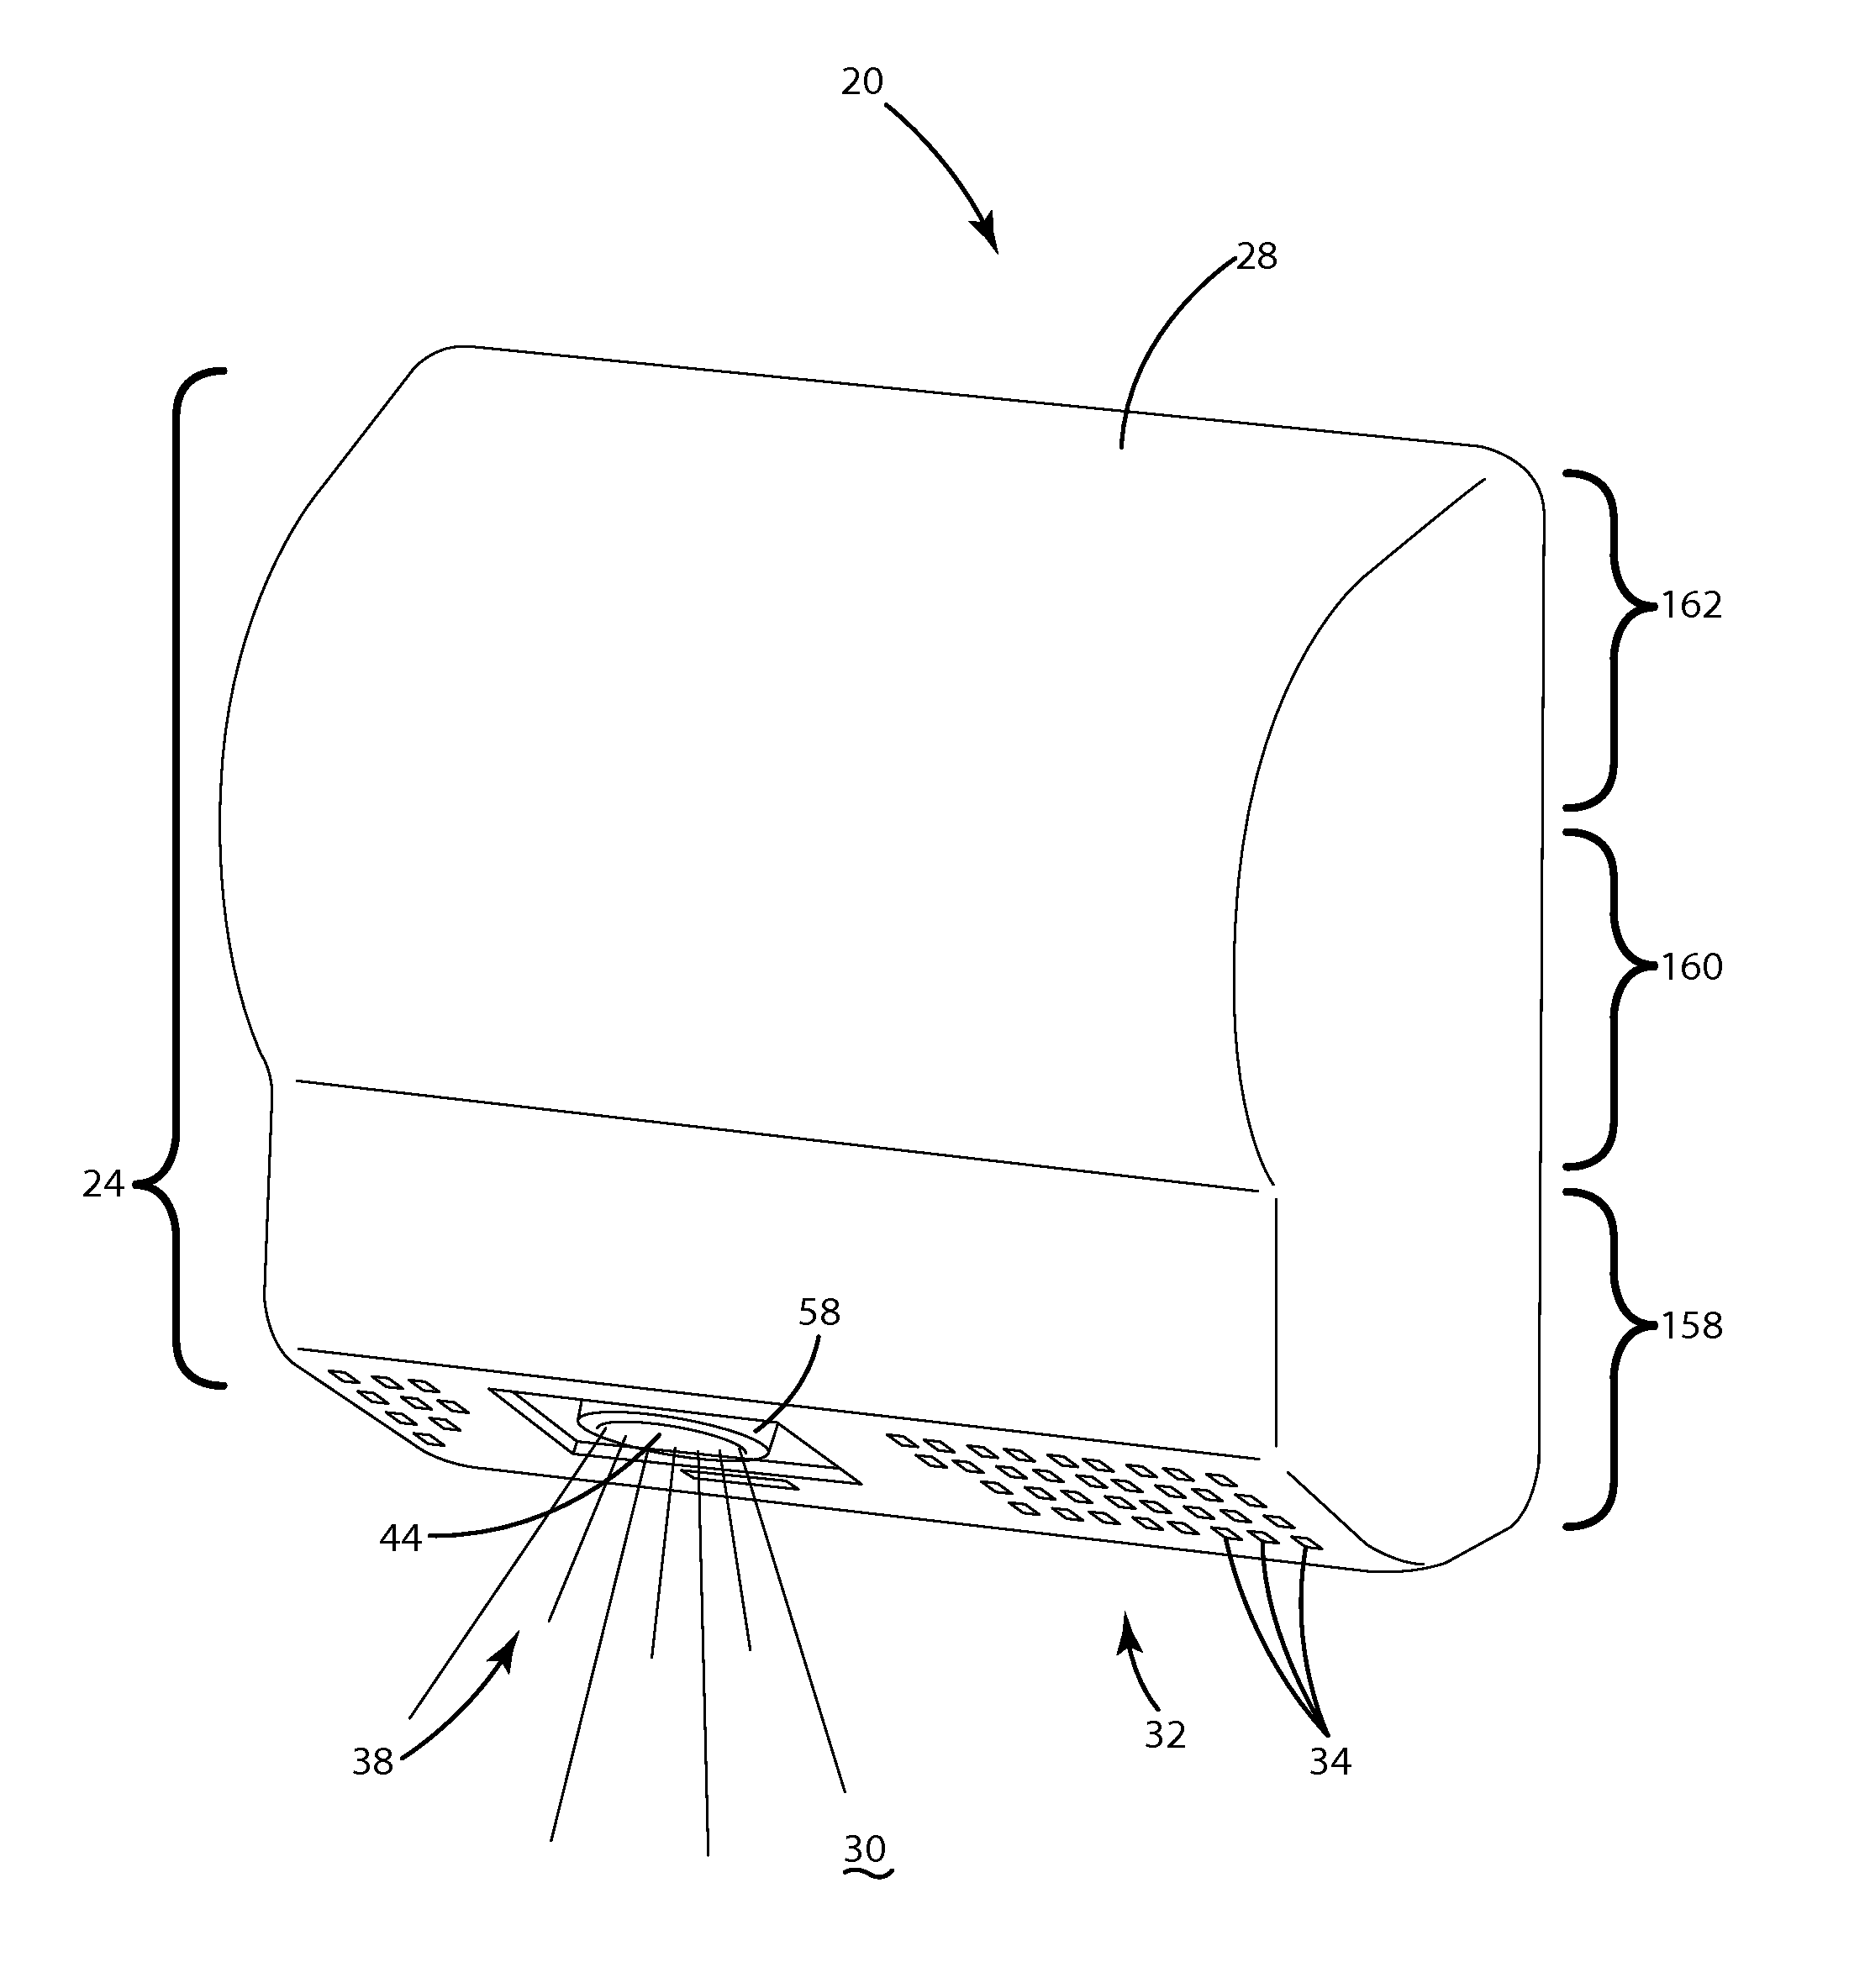 Hand dryer with sanitizing ionization assembly